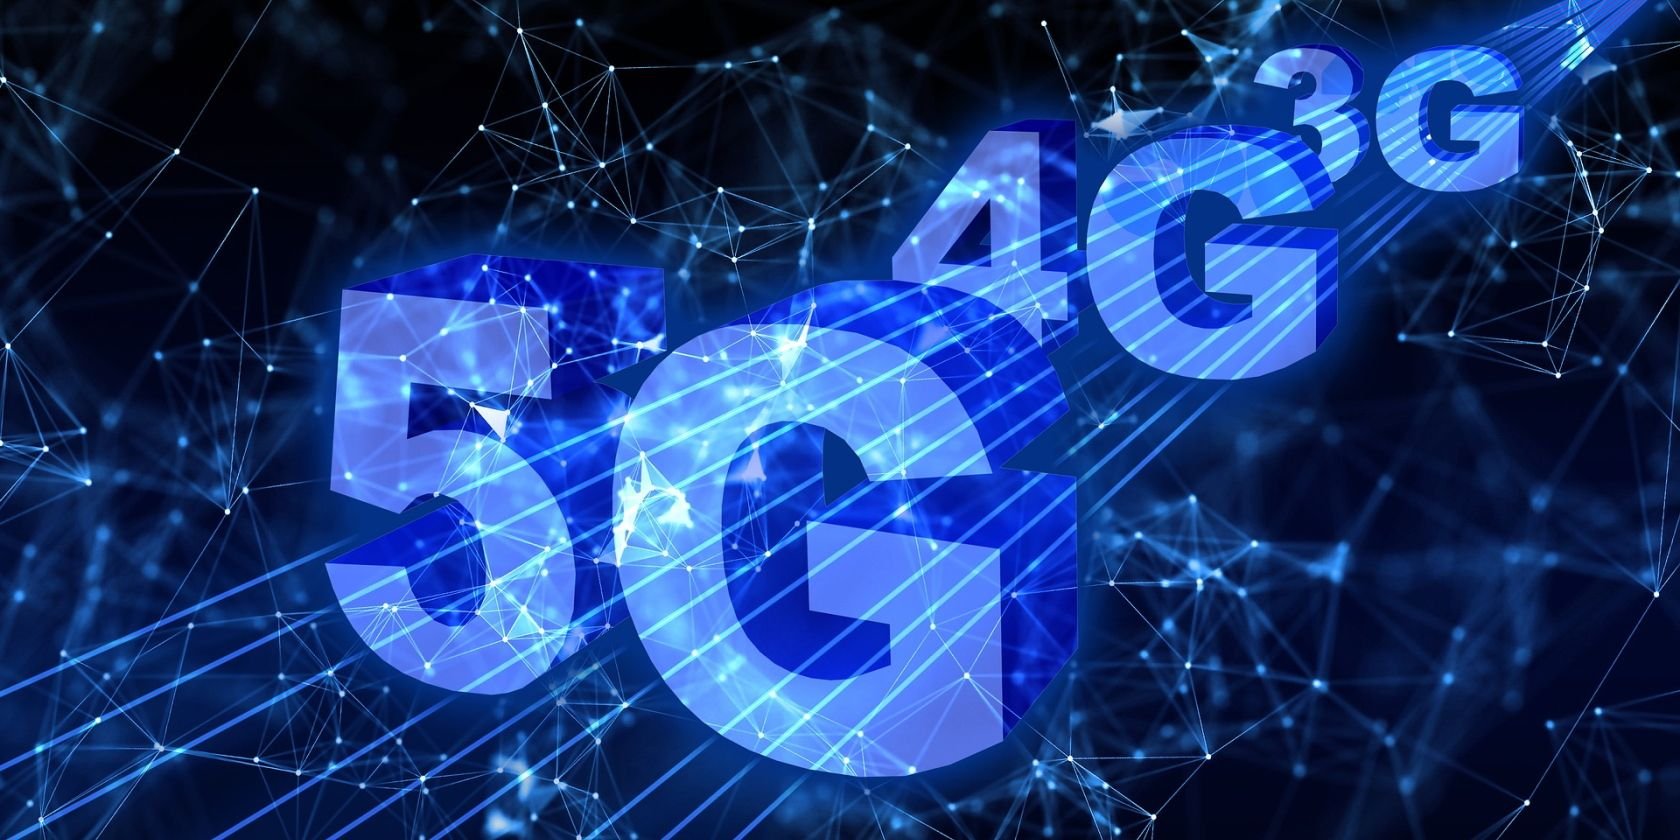 How to Disable 5G on Any Device